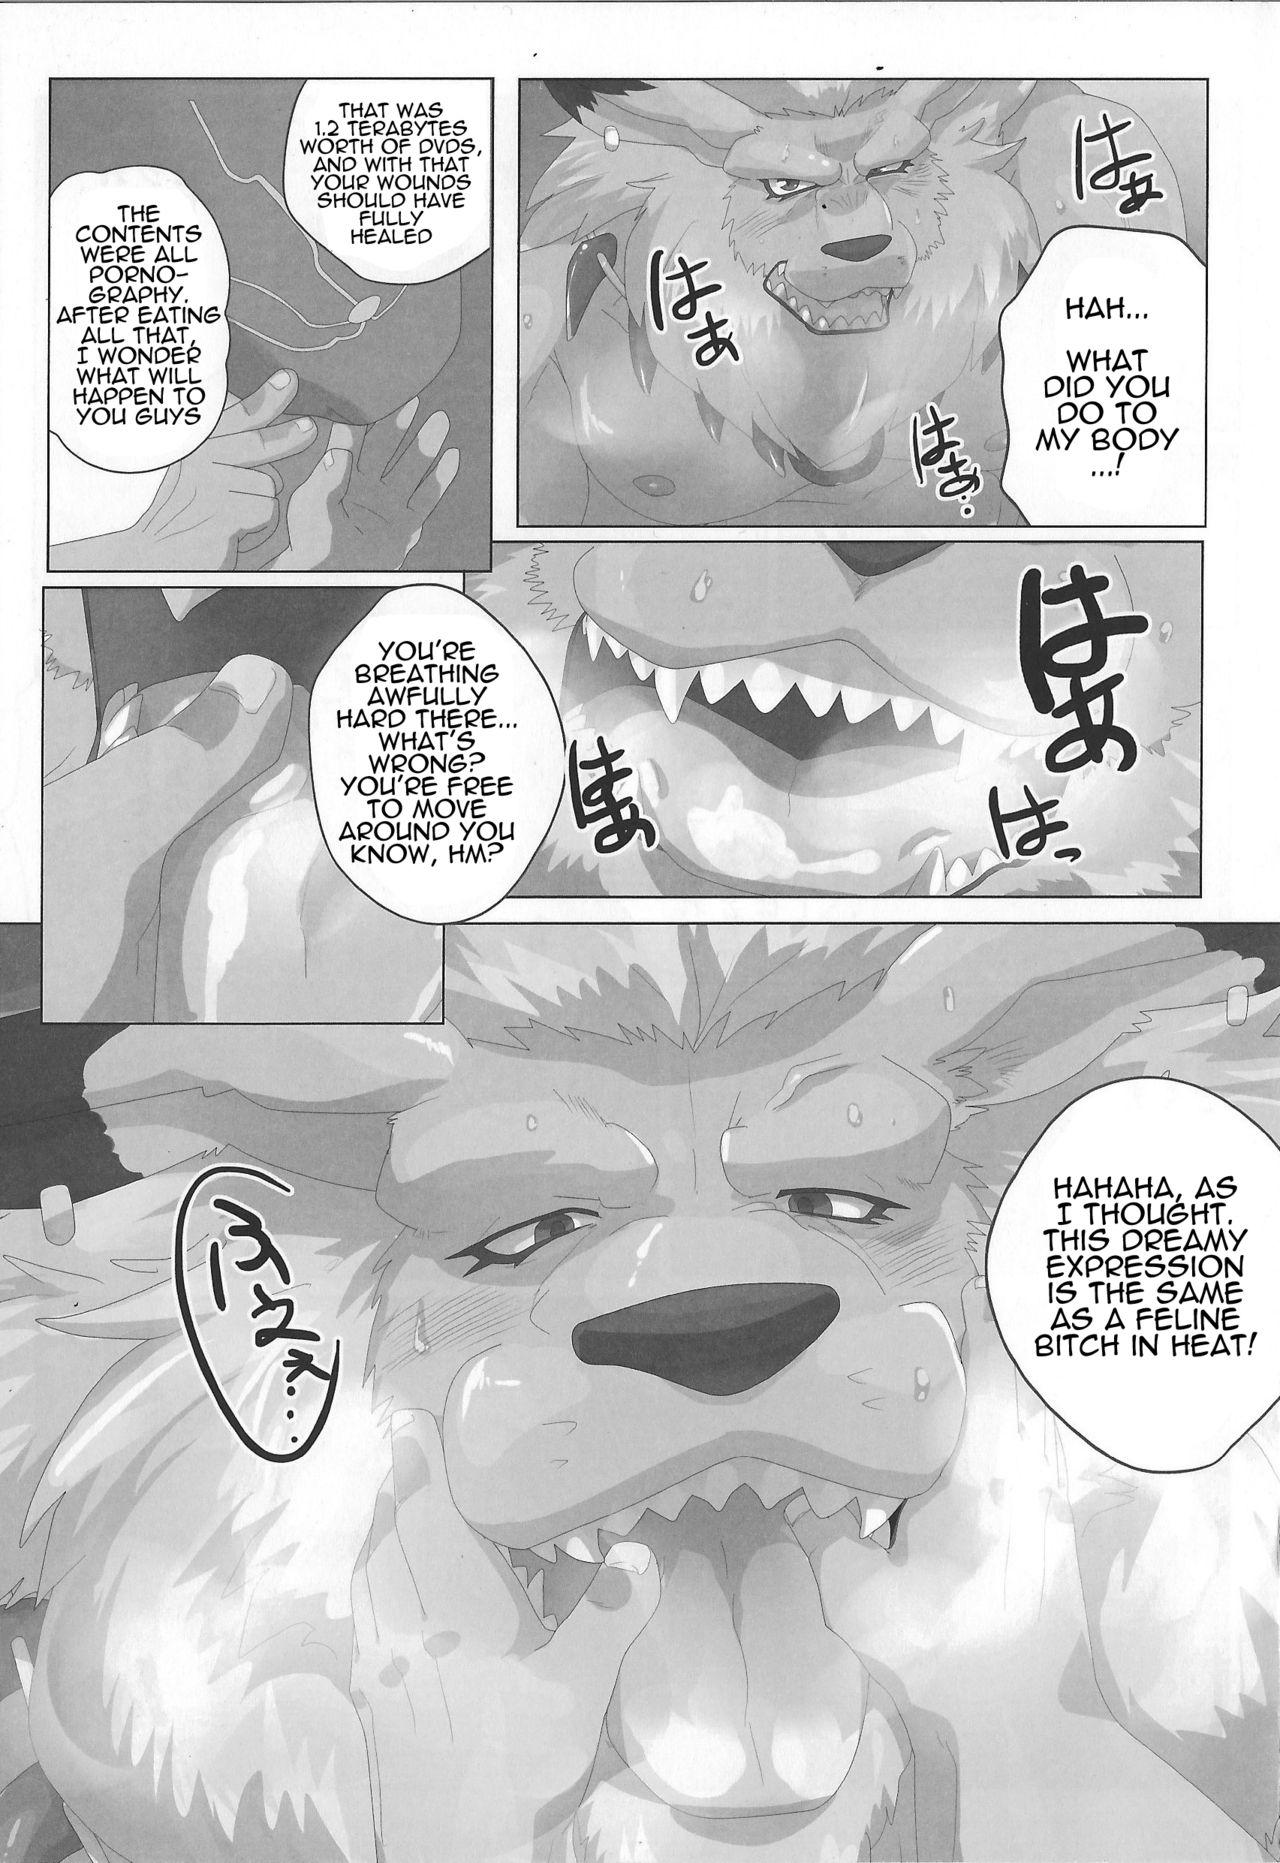 [Debirobu] For the Lion-Man Type Electric Life Form to Overturn Fate - Leomon Doujin [ENG] 8